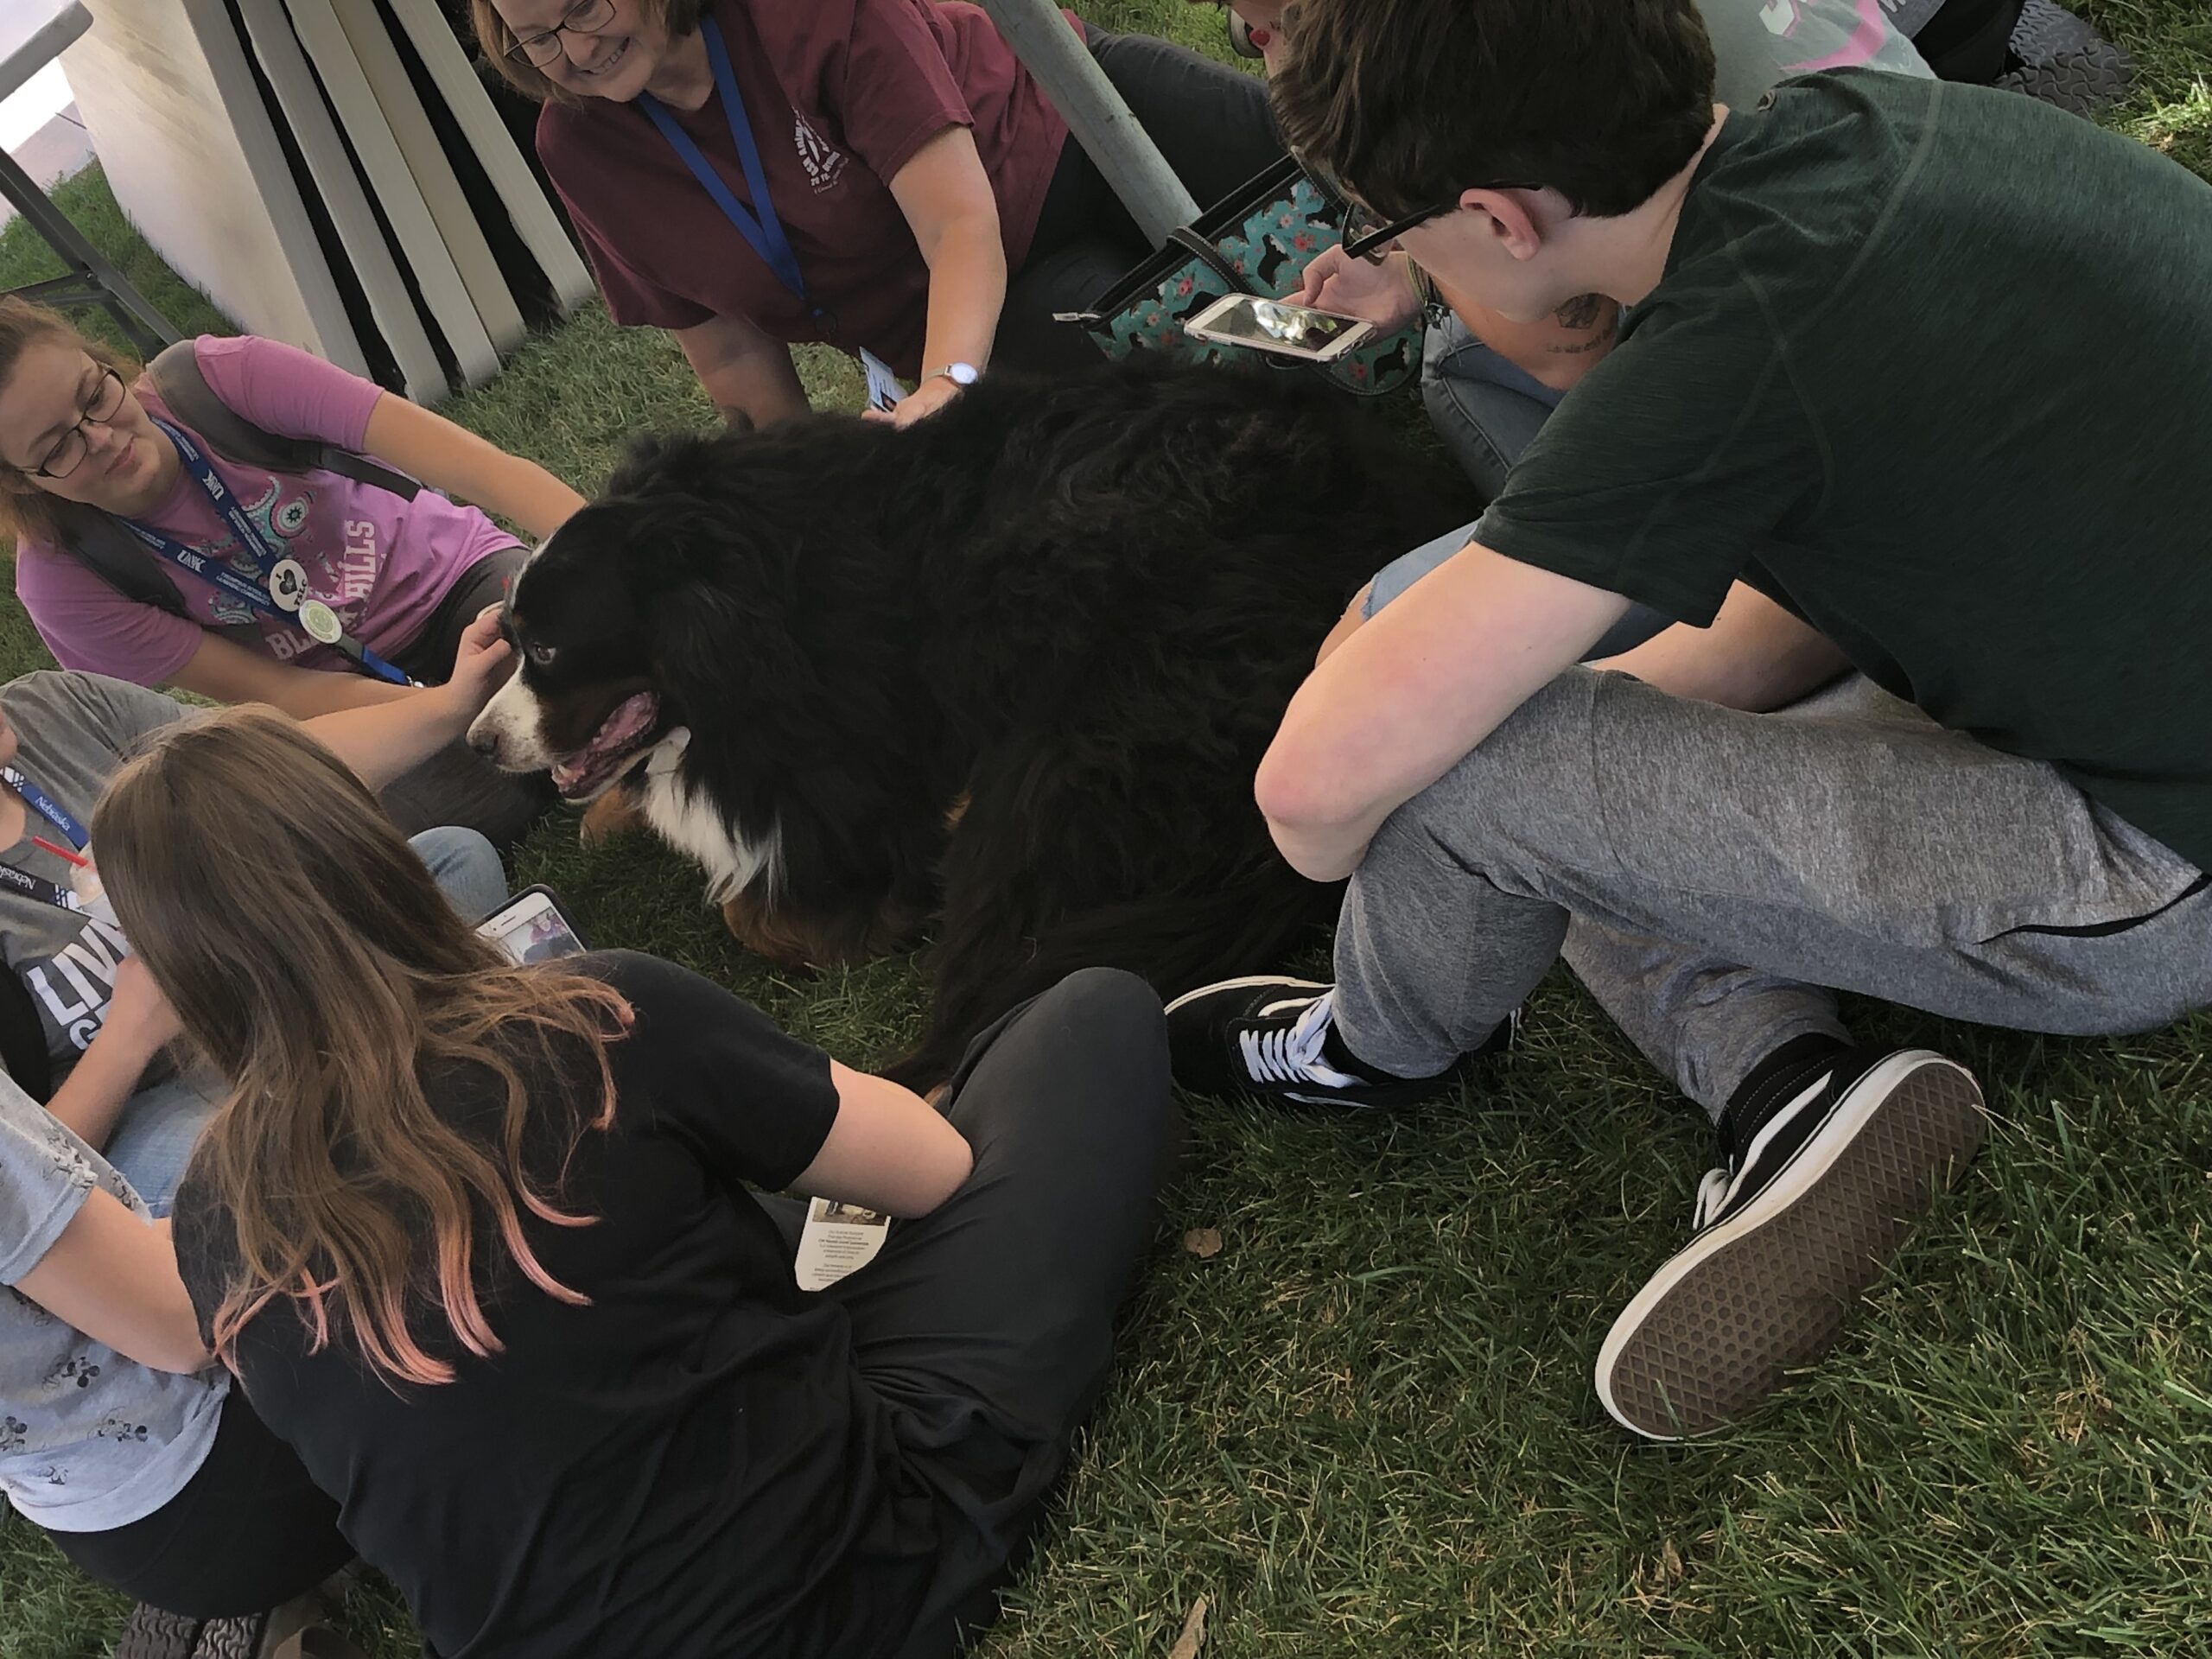 Group of students deal with exam stress by petting a bernese mountain dog.